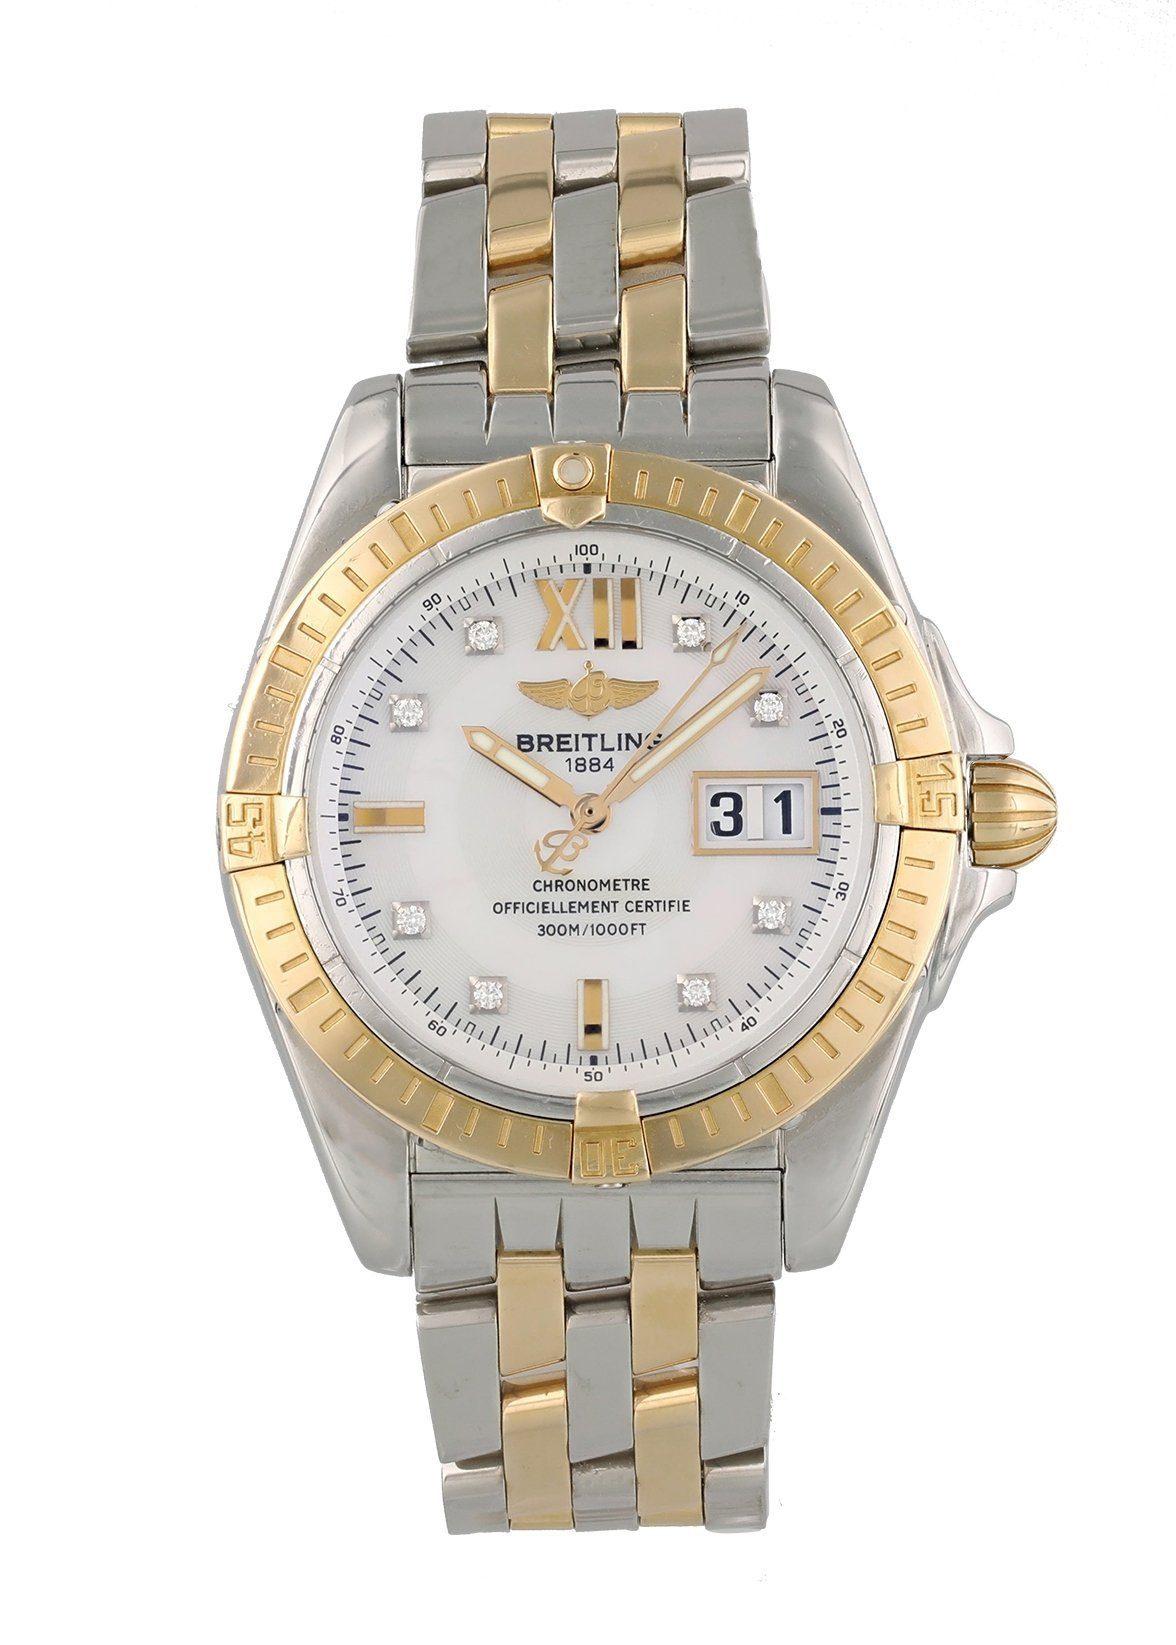 Breitling Galactic C49350 Men Watch. 
41mm Stainless Steel case. 
Yellow Gold bezel. 
Mother-of-Pearl dial with Luminous gold hands and index hour markers. 
Minute markers on the outer dial. 
Date display at the 3 o'clock position. 
Stainless Steel